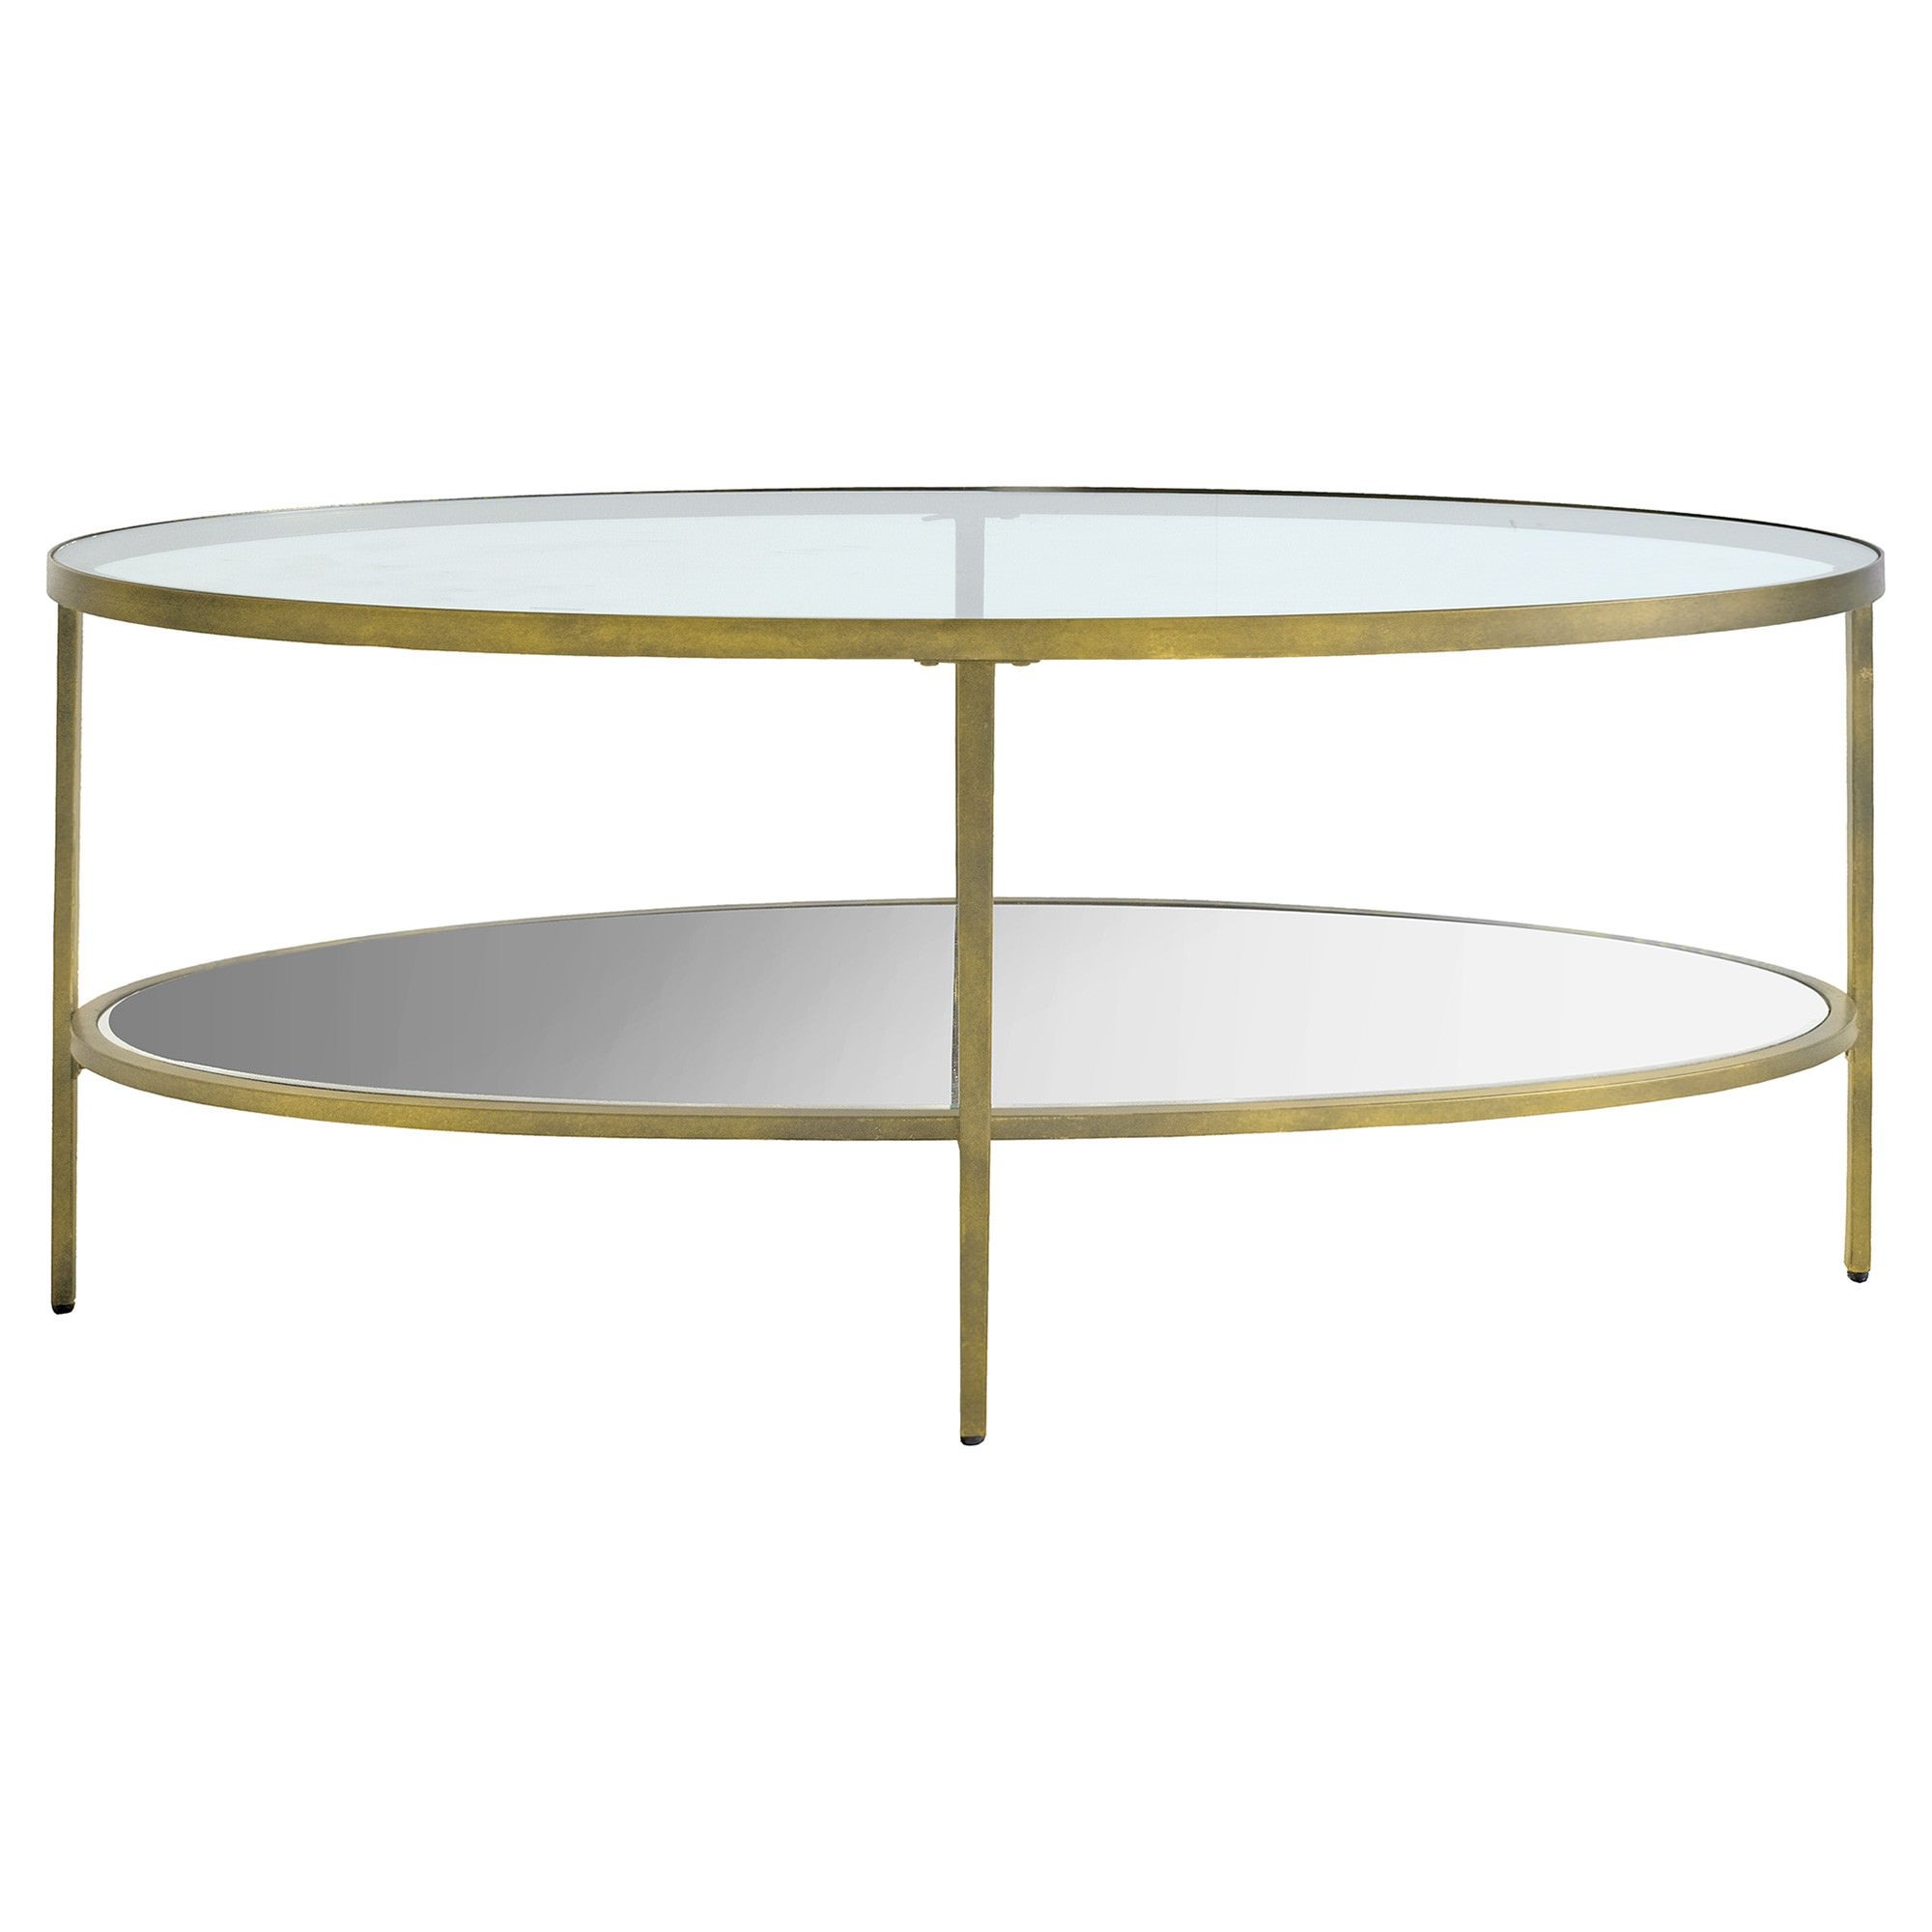 Firmo Glass & Metal Oval Coffee Table, 112cm, Champagne Gold